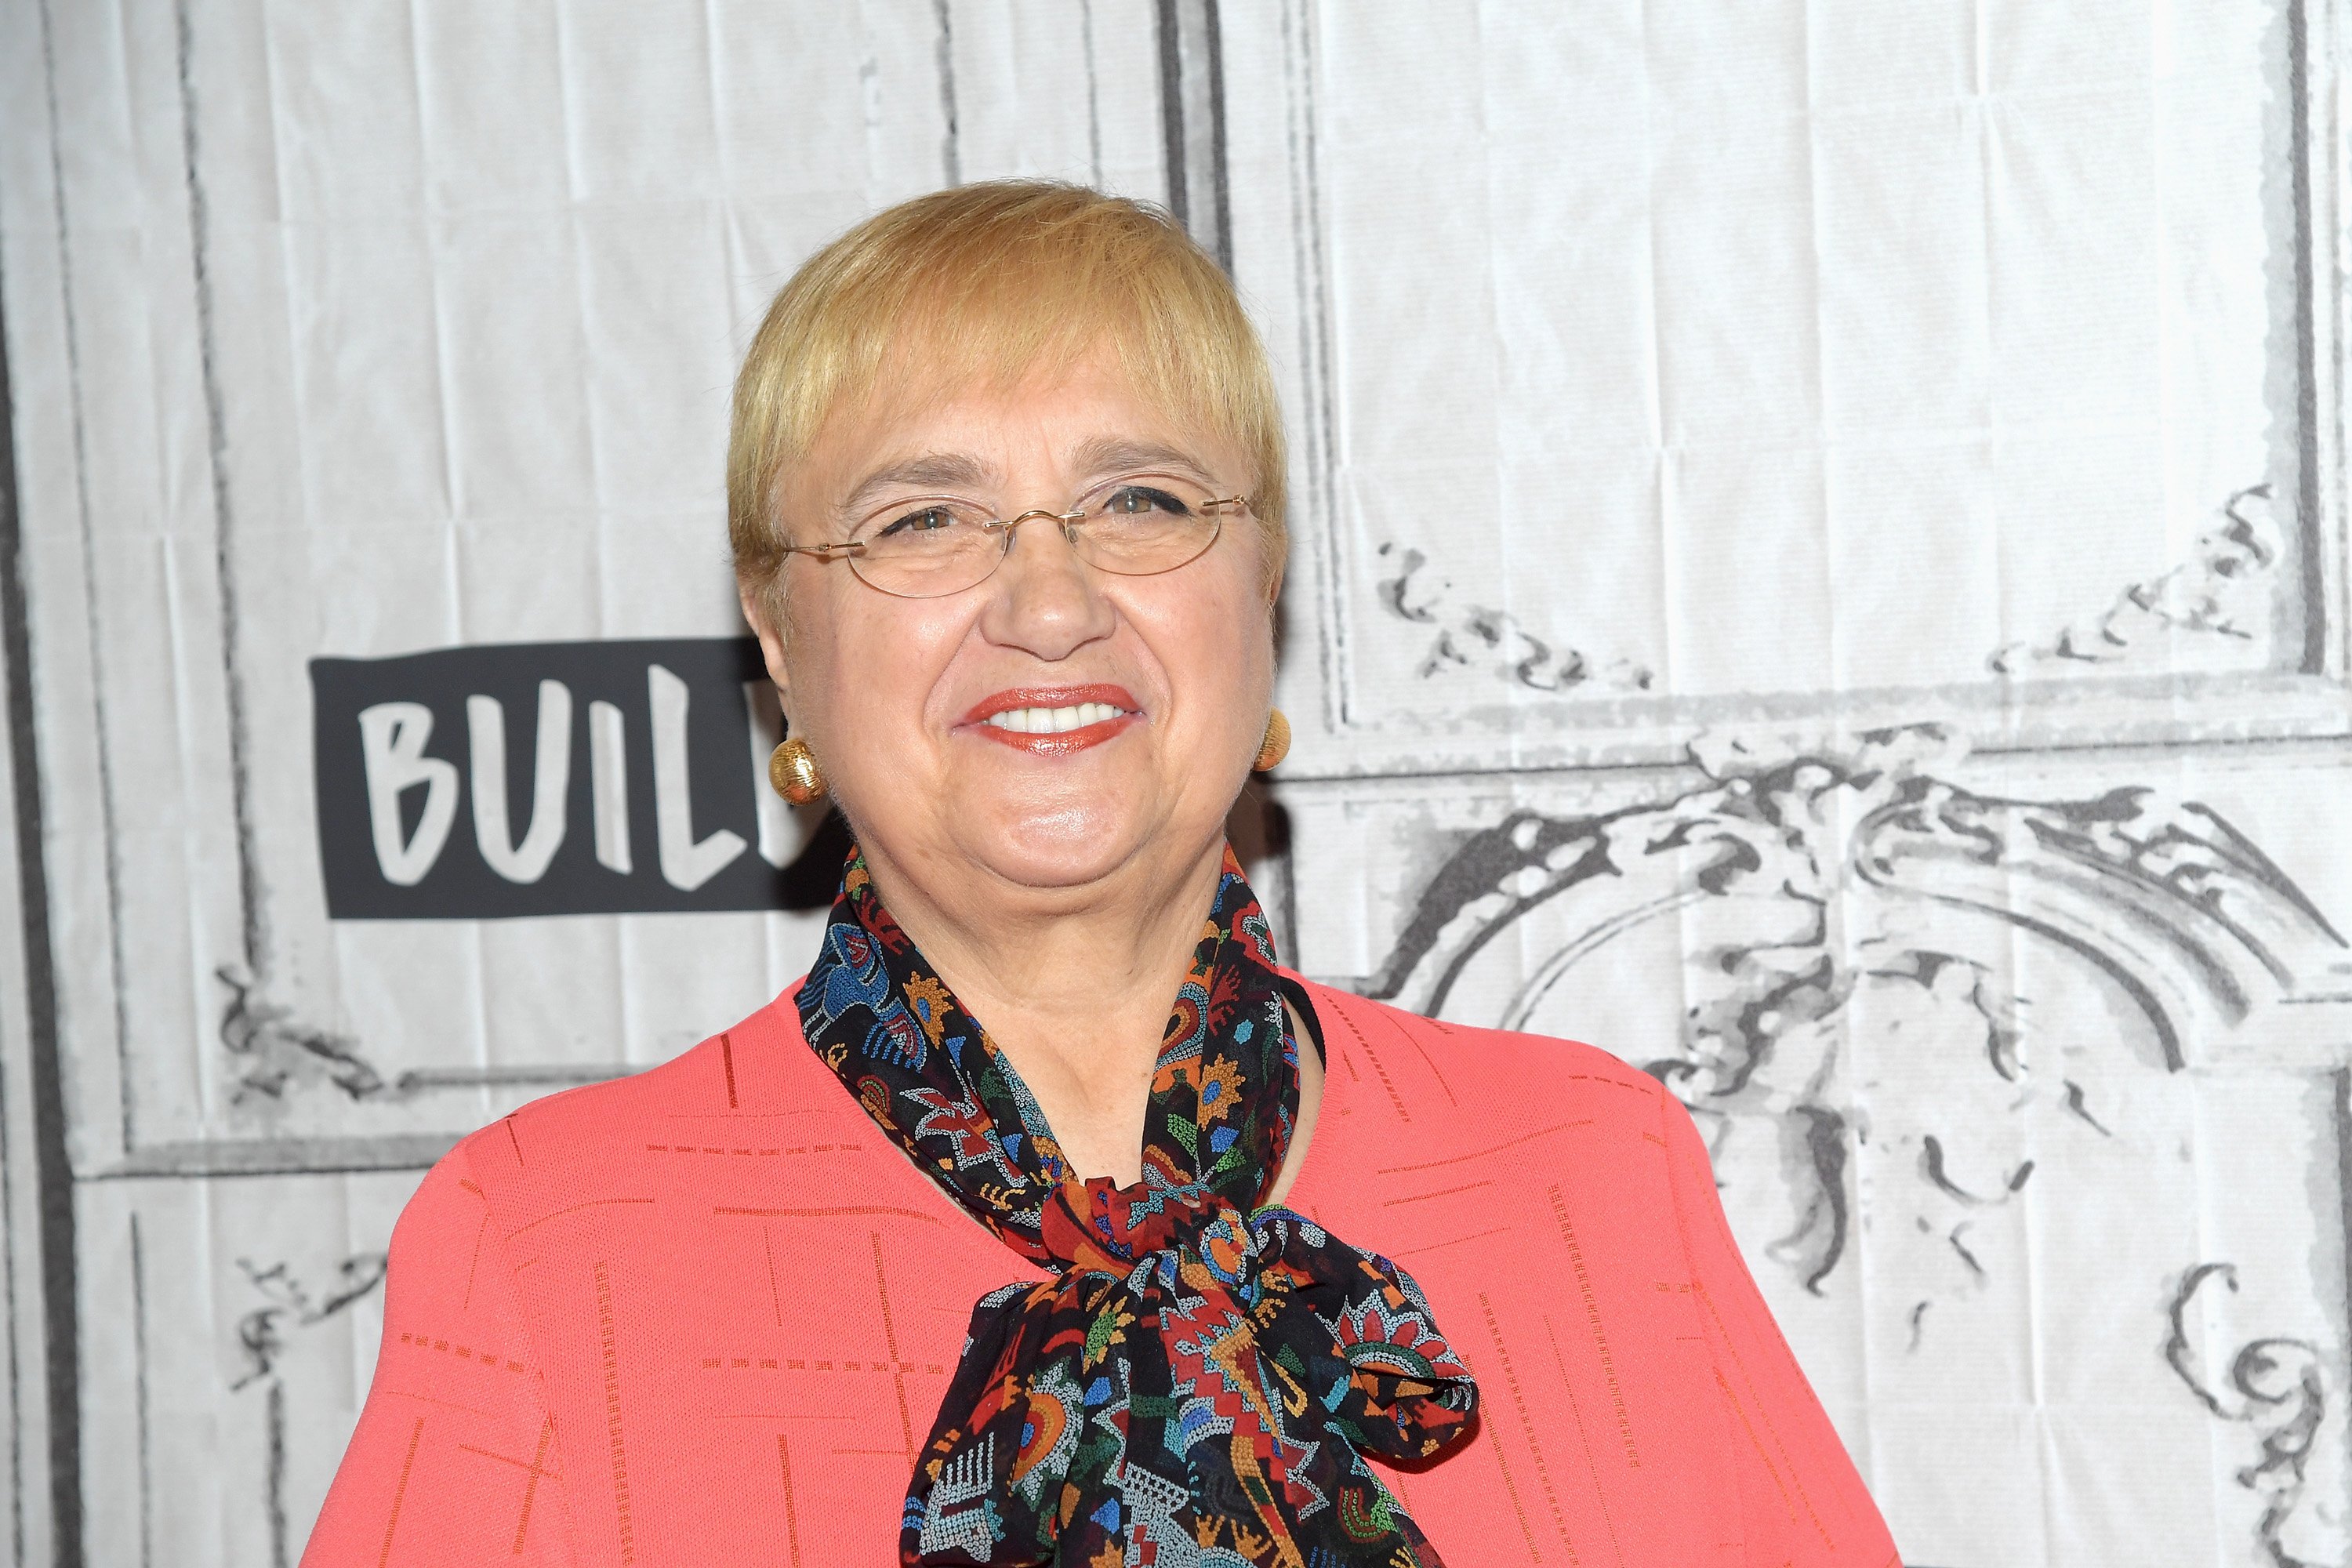 Celebrity chef Lidia Bastianich wears a pink blouse in this photograph.